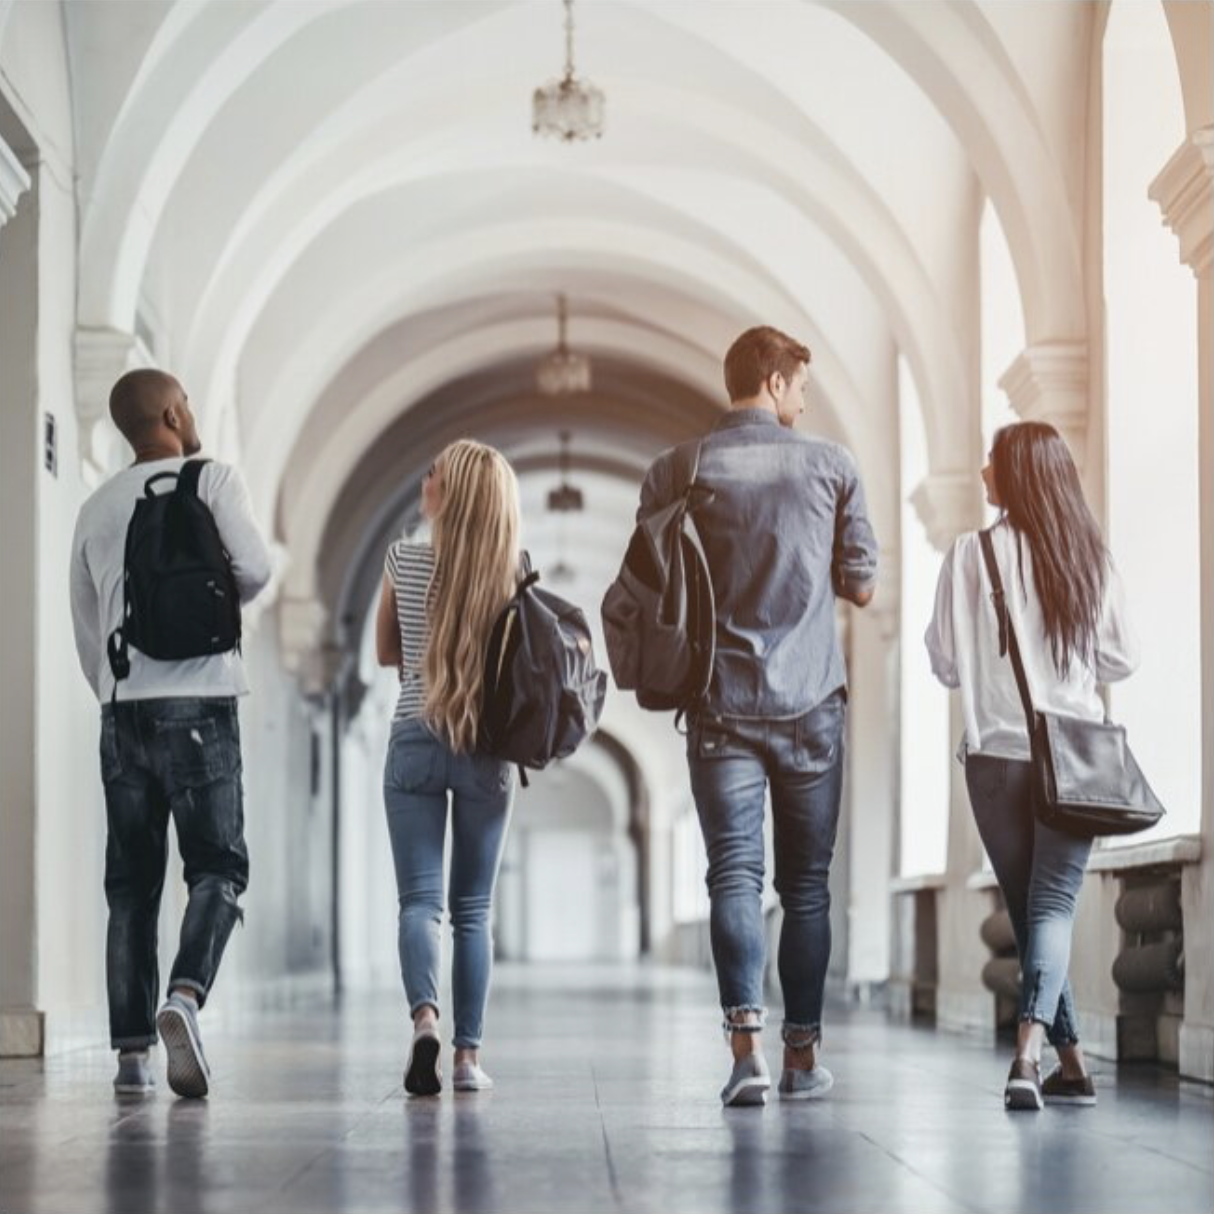 College students walk down a university hall.